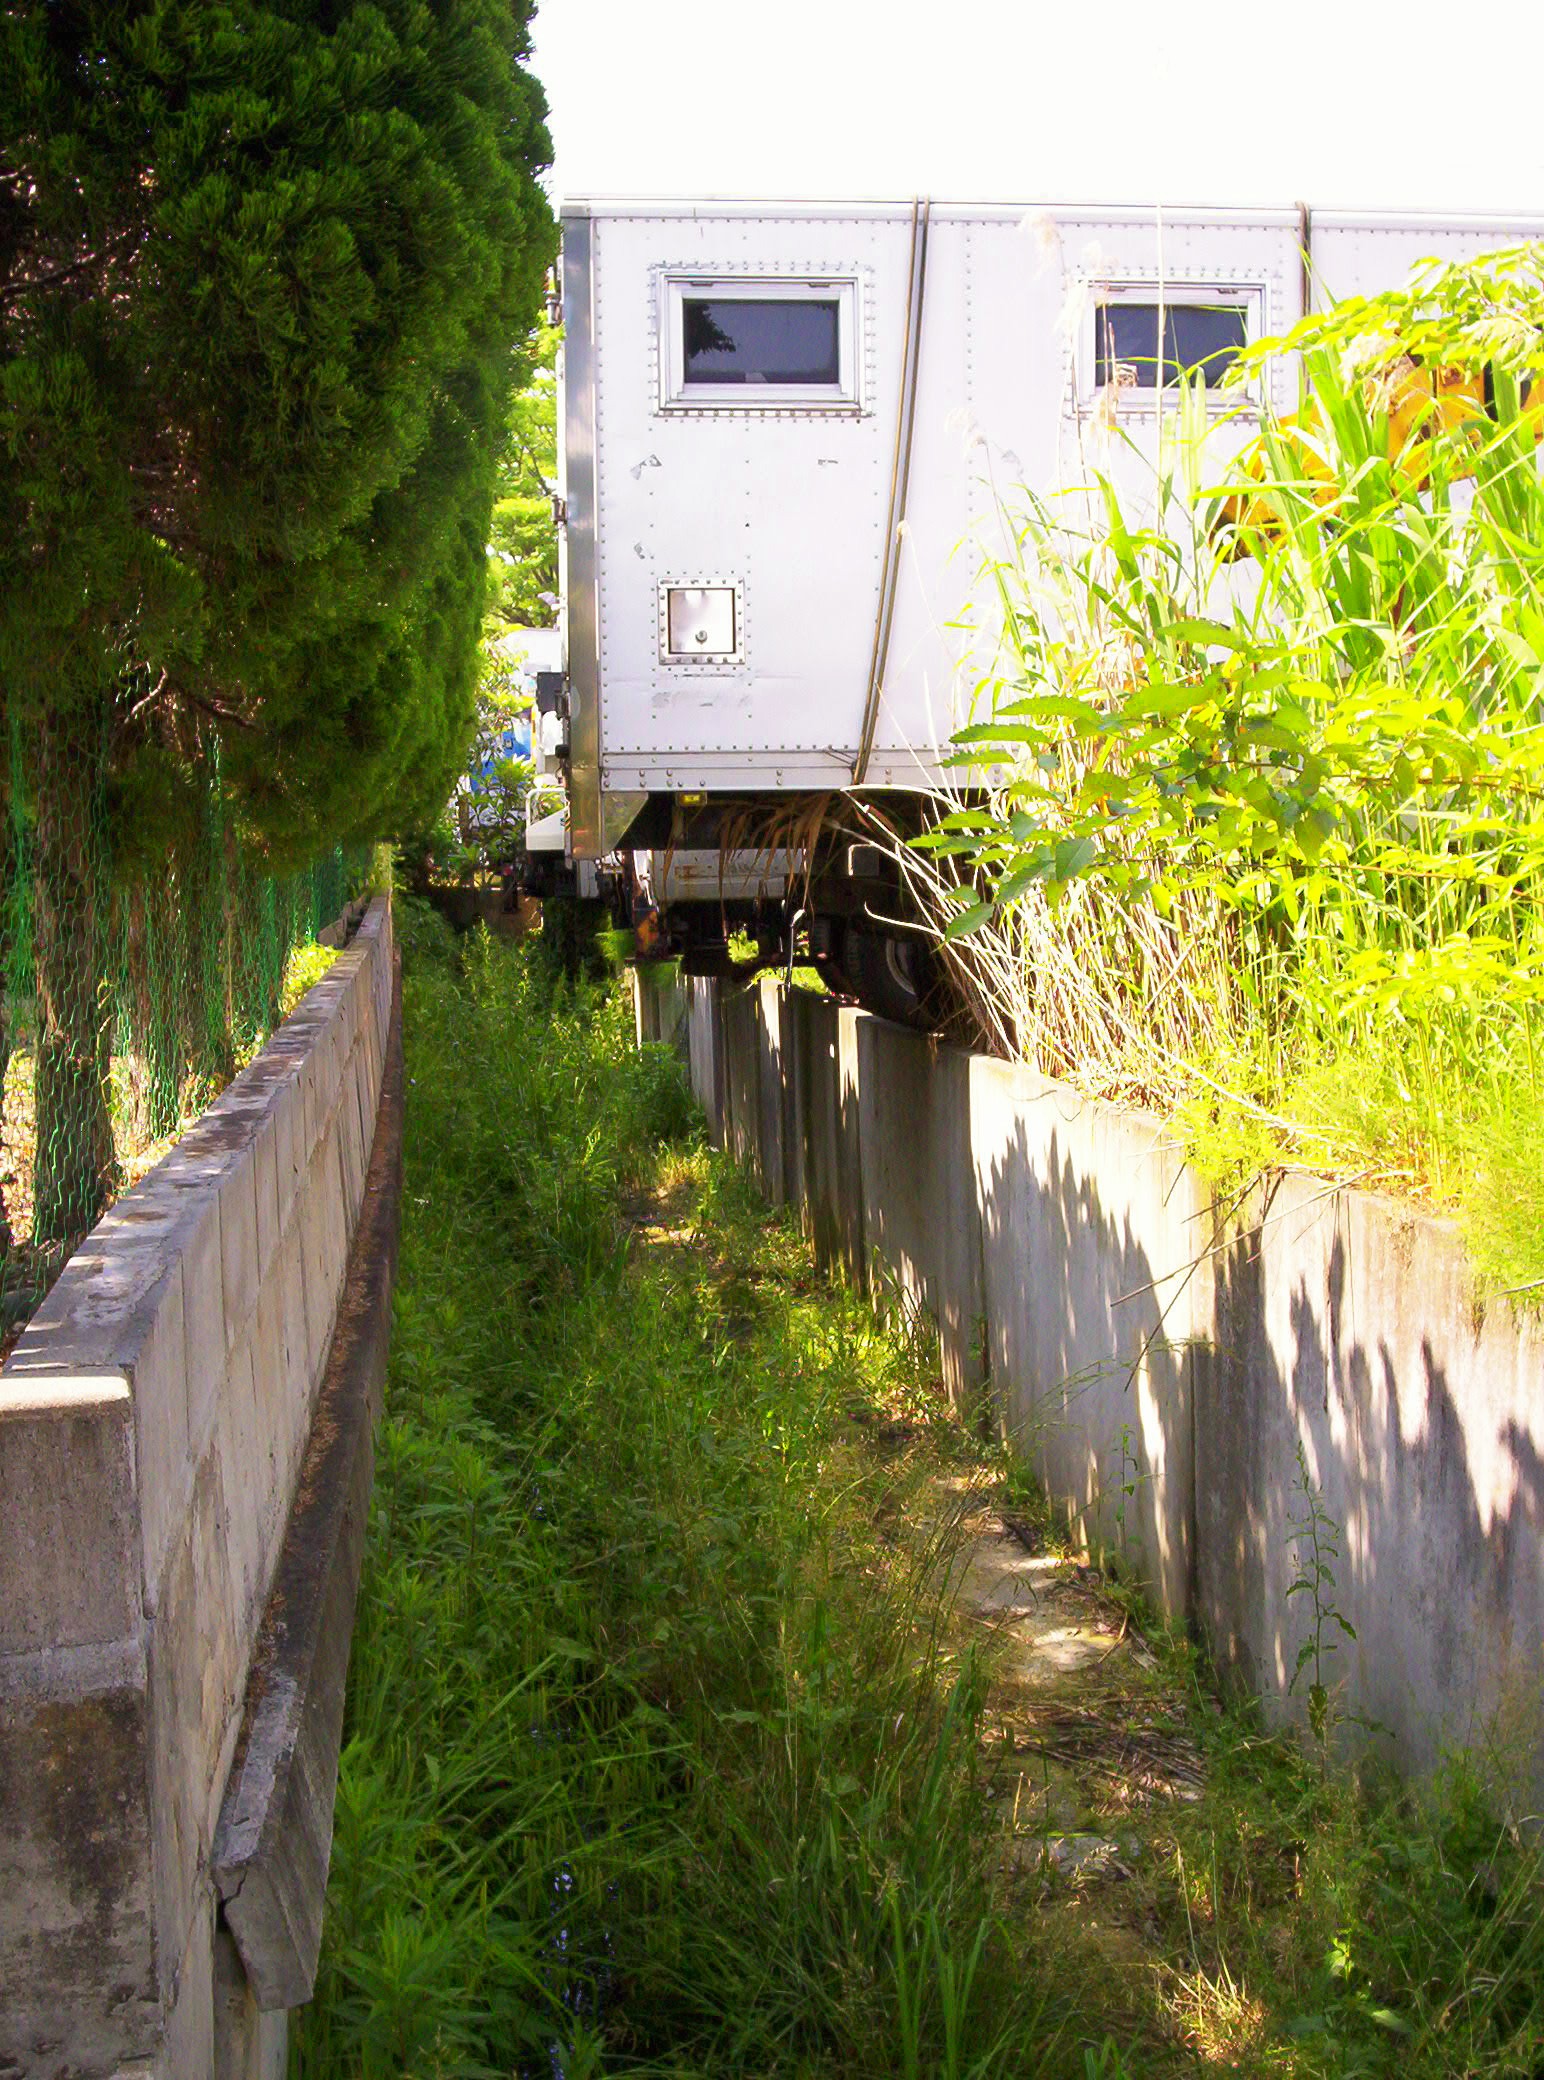 Finally, this is along the Lavender Path. This is a truck bed, parked so that it's sticking over a weed-grown drainage ditch. The truck seems not to have been moved in a very long time. Wouldn't you love to set up a writing house in that truck bed?! Well, I would, anyway. . . .